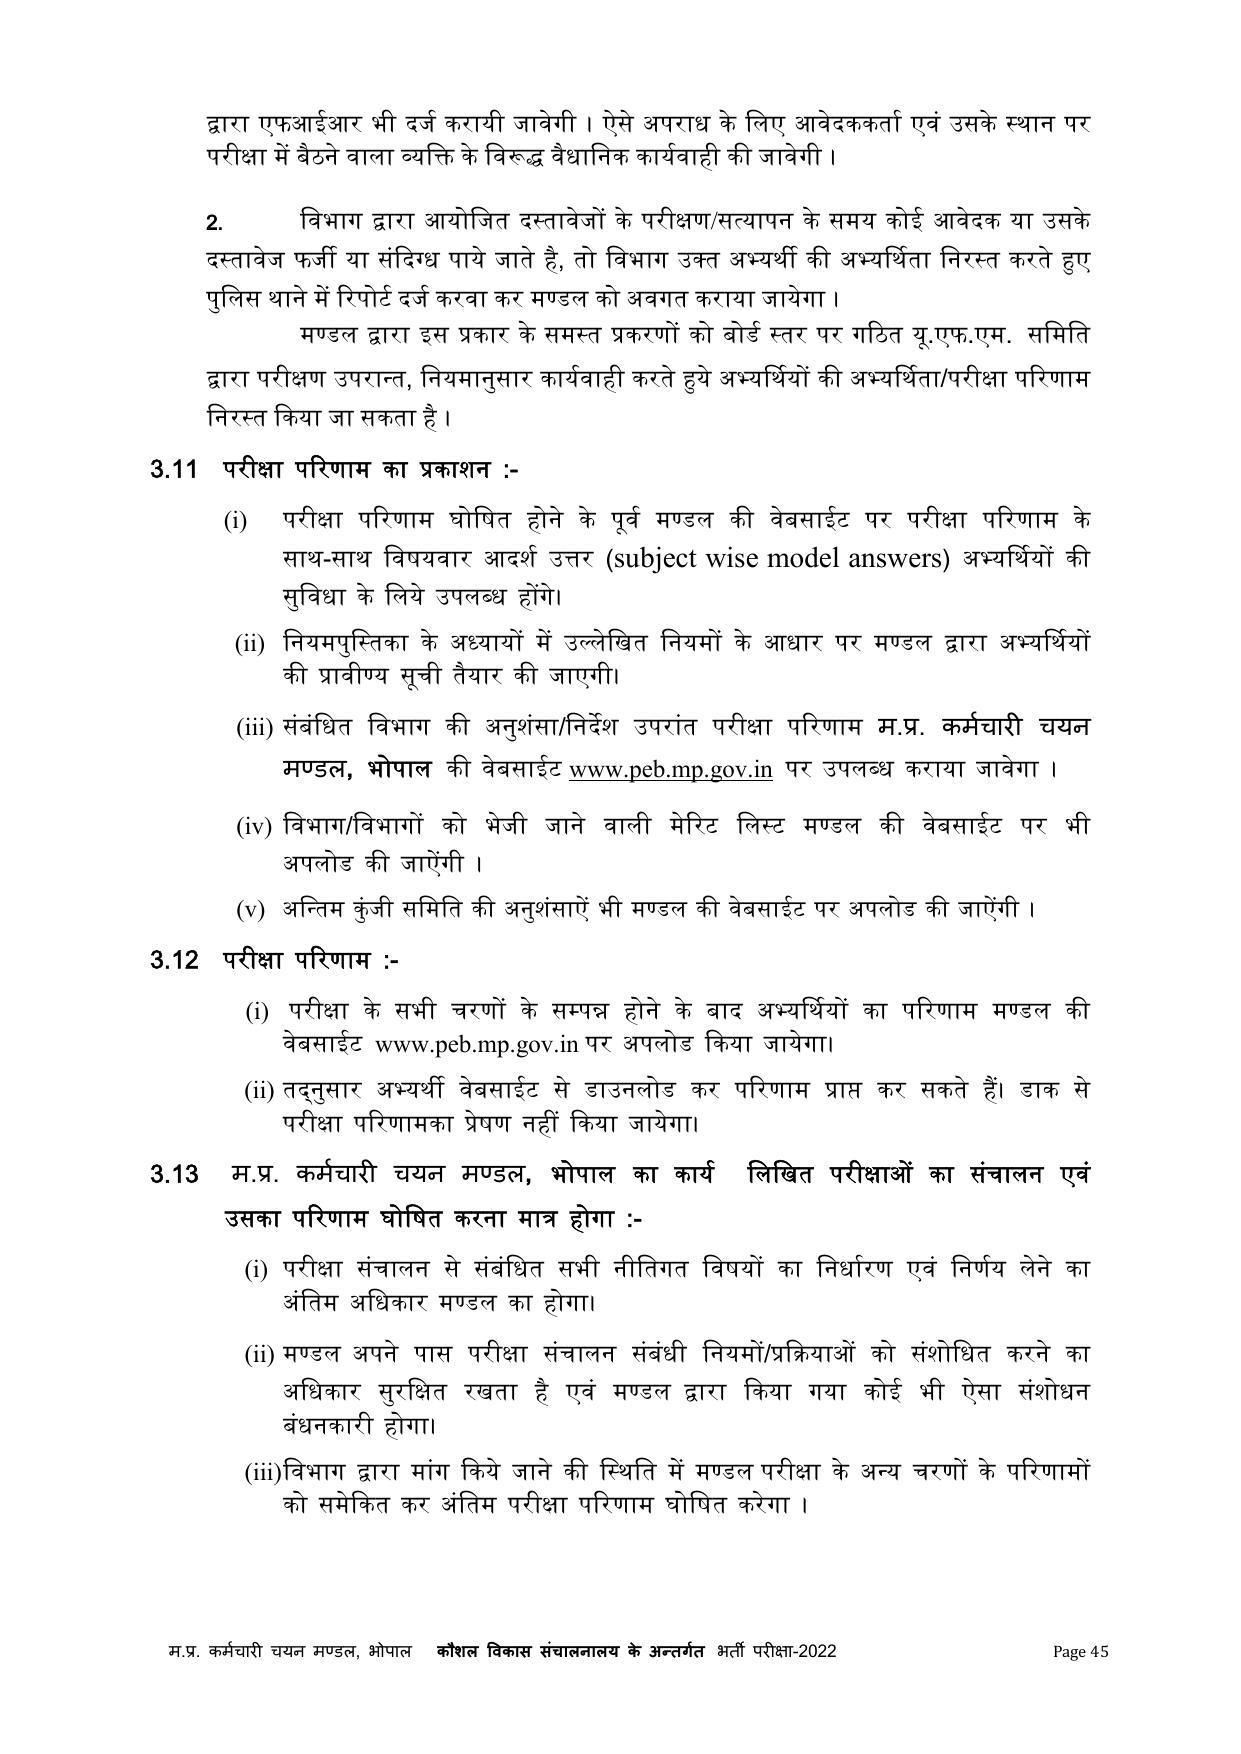 MPPEB Invites Application for 305 ITI Training Officer Recruitment 2022 - Page 56